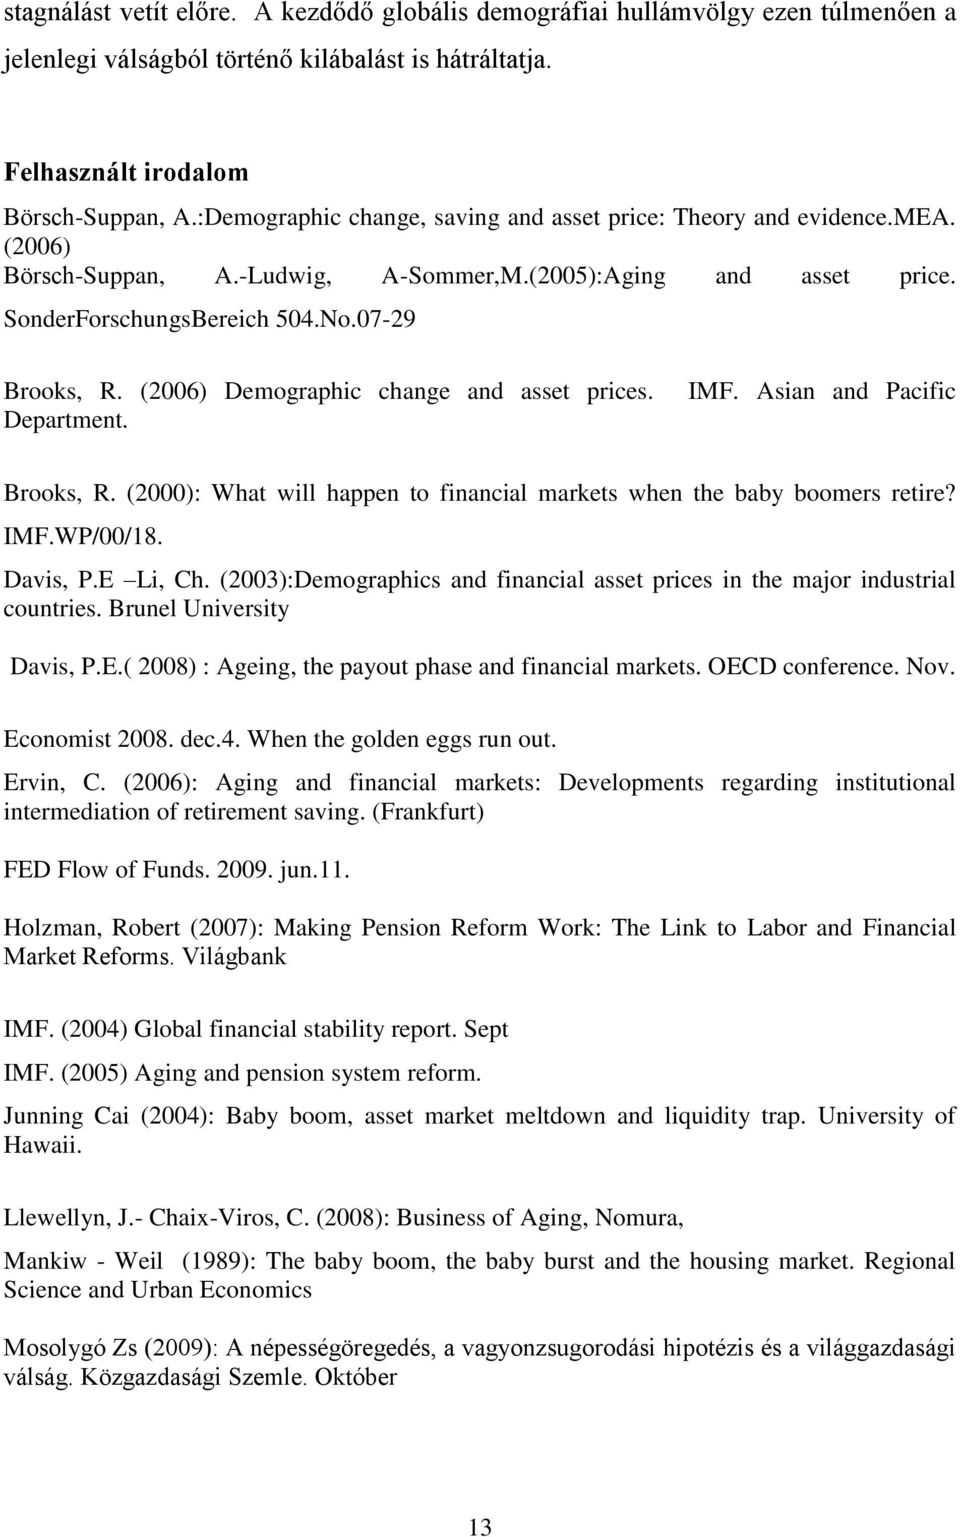 (2006) Demographic change and asset prices. Department. IMF. Asian and Pacific Brooks, R. (2000): What will happen to financial markets when the baby boomers retire? IMF.WP/00/18. Davis, P.E Li, Ch.